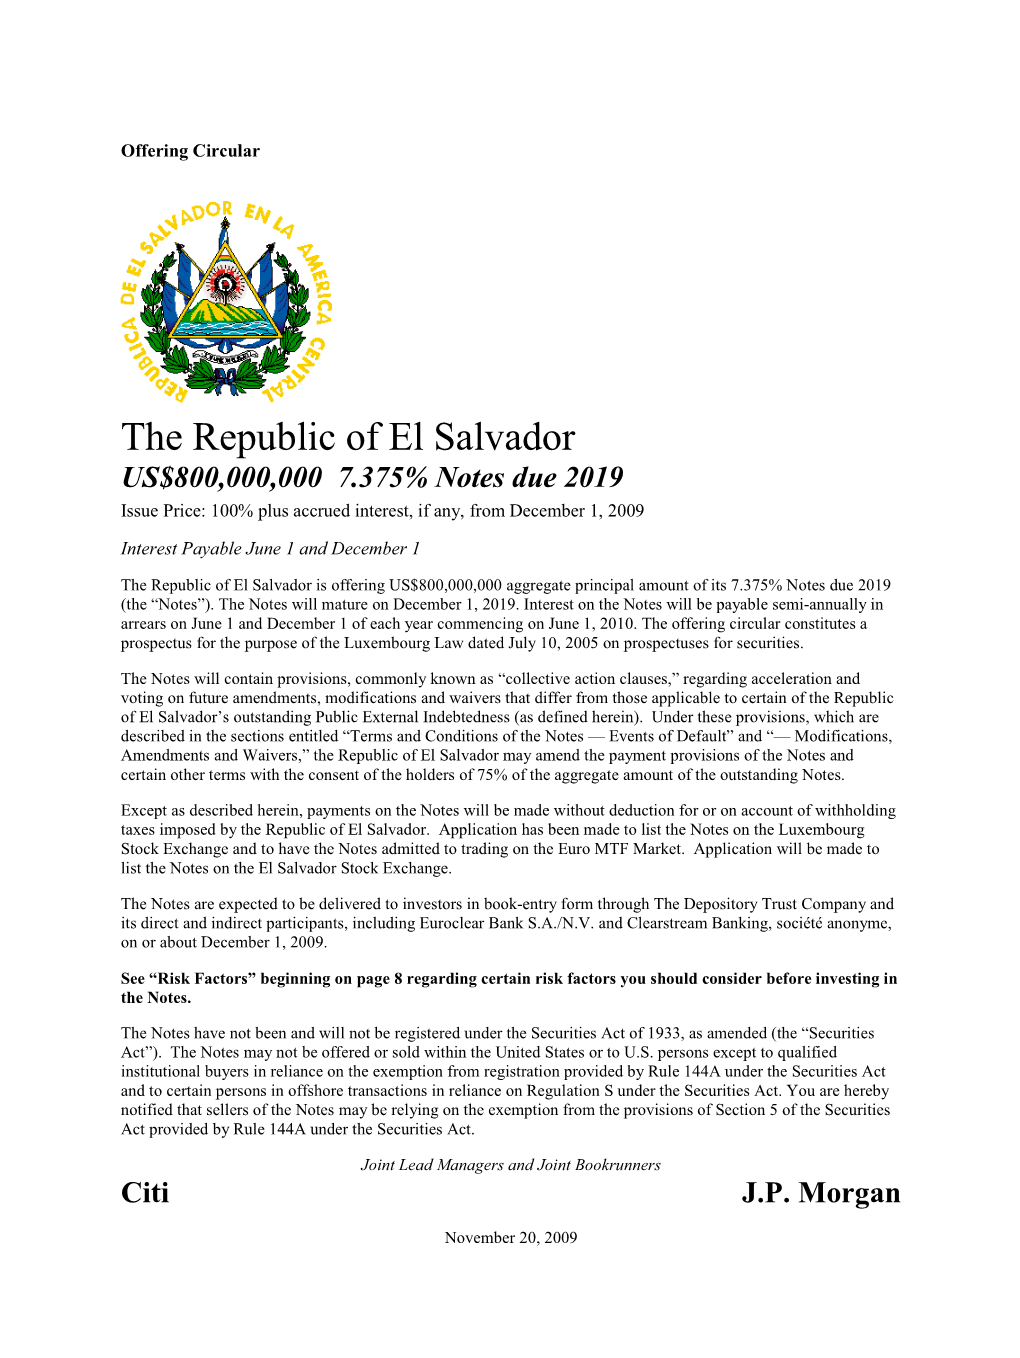 The Republic of El Salvador Is Offering US$800,000,000 Aggregate Principal Amount of Its 7.375% Notes Due 2019 (The “Notes”)